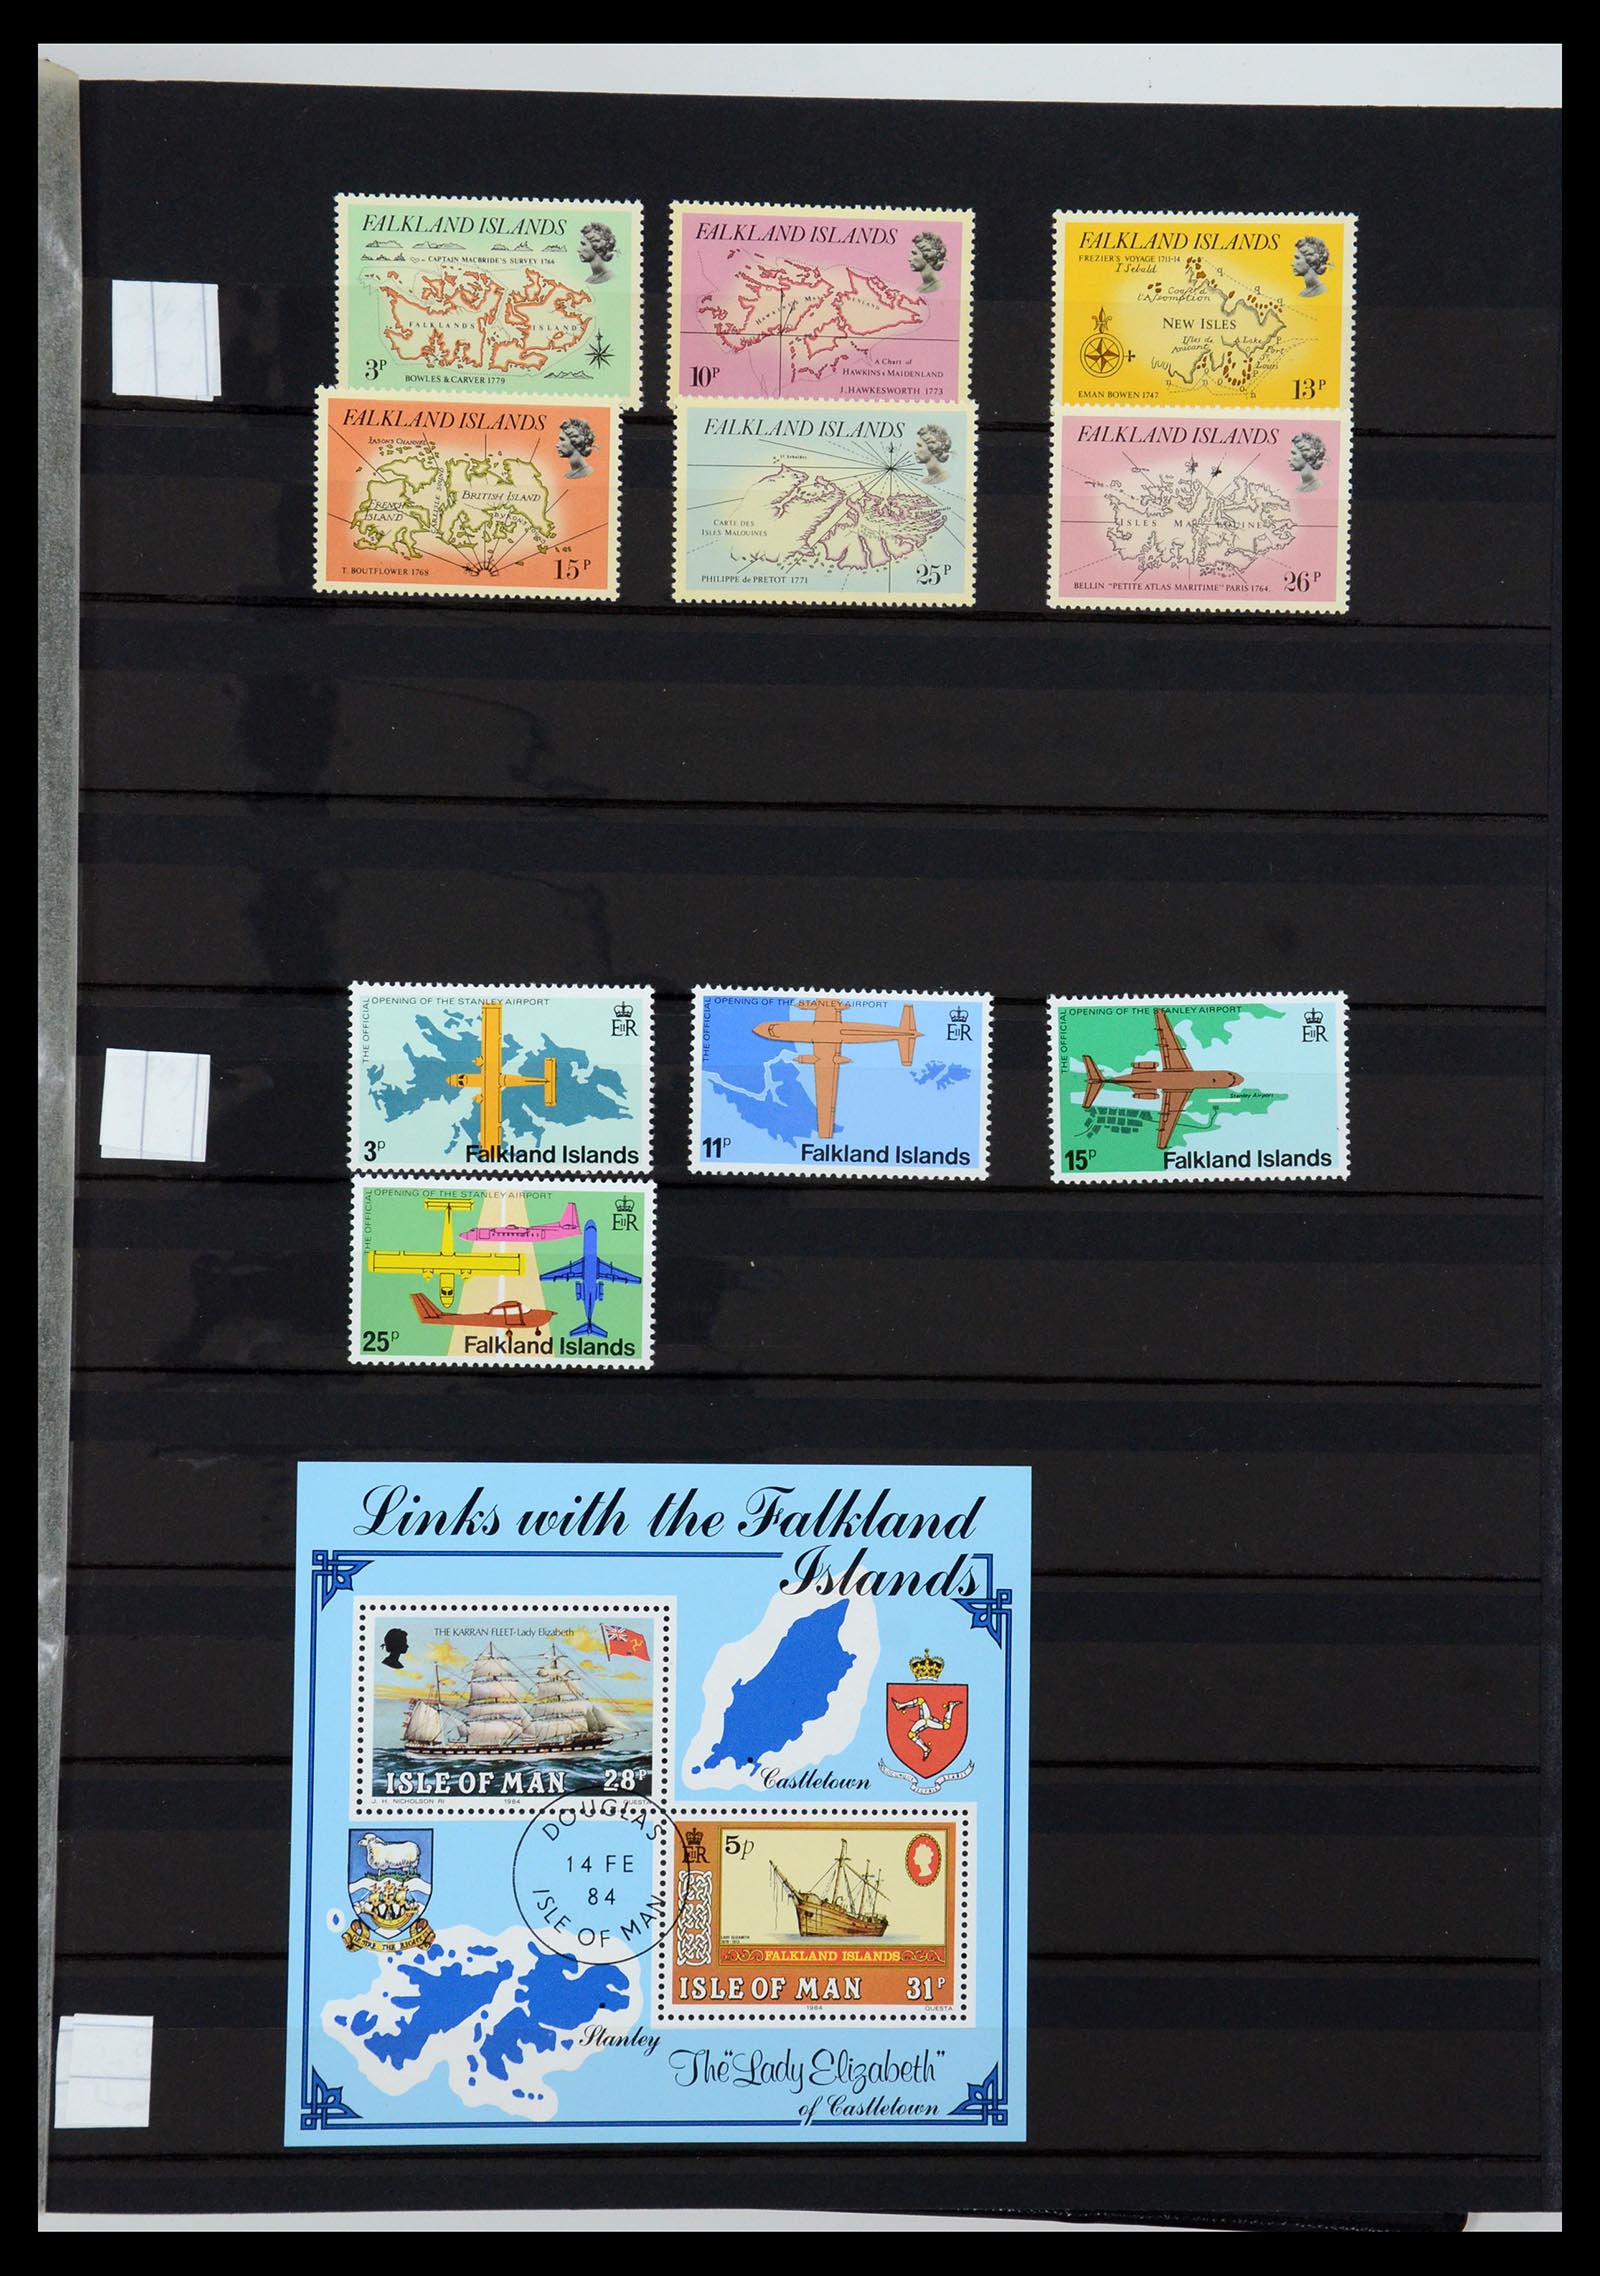 36238 292 - Stamp collection 36238 Motif maps 1900-2000.